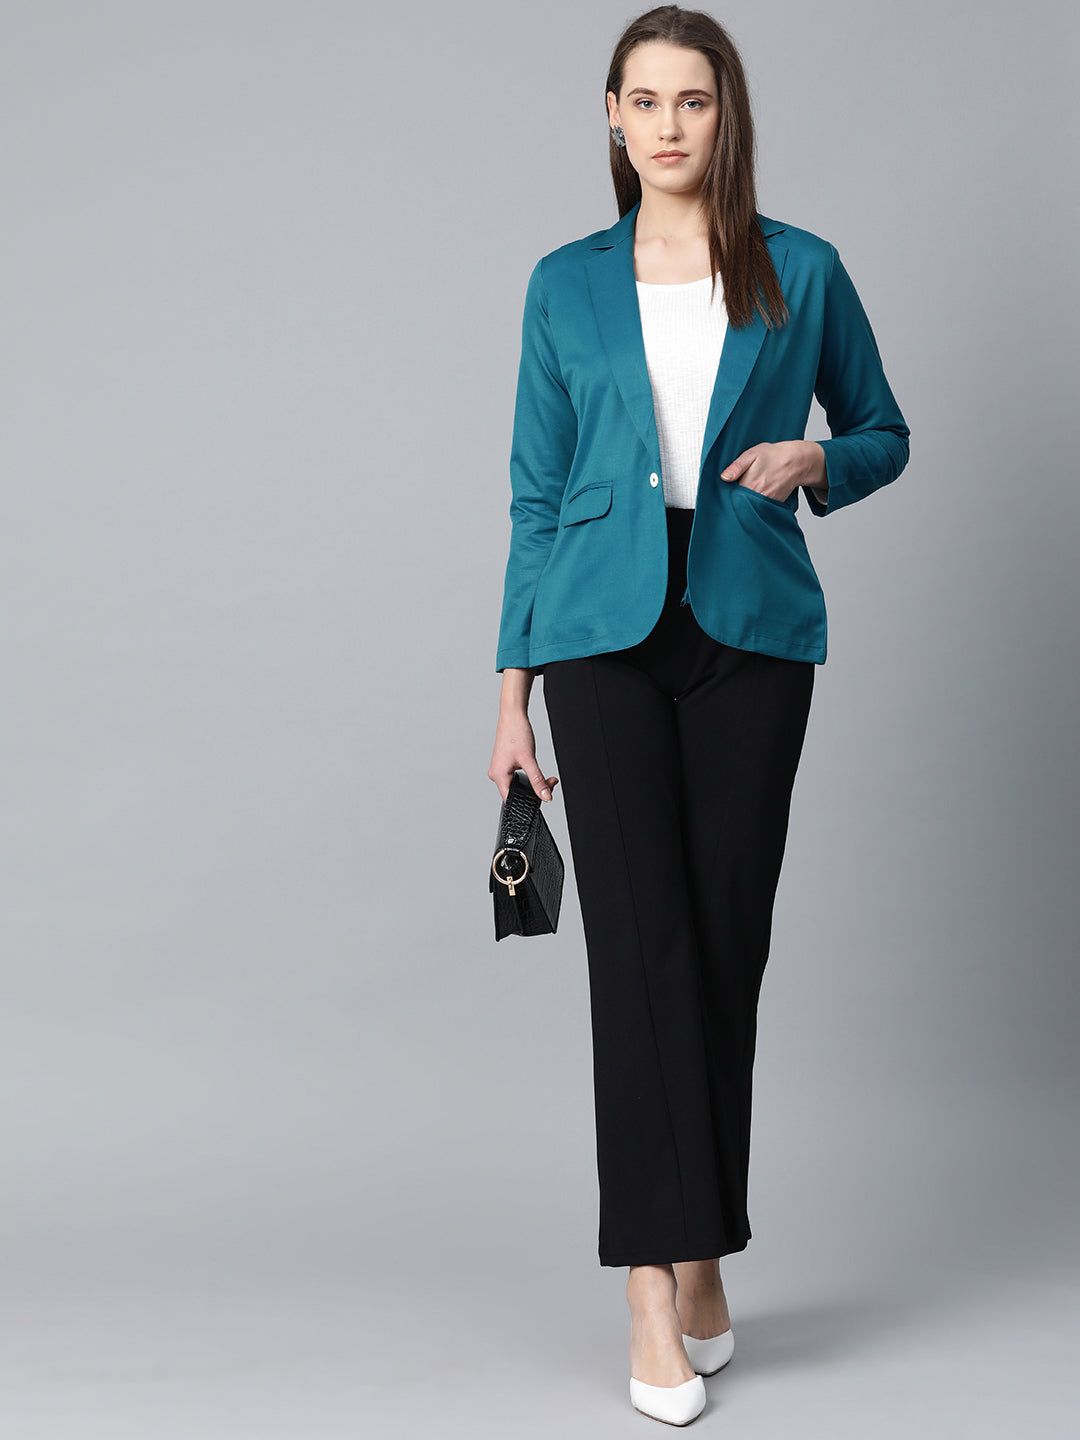 Jompers Women Teal Blue Solid Single-Breasted Smart Casual Blazer